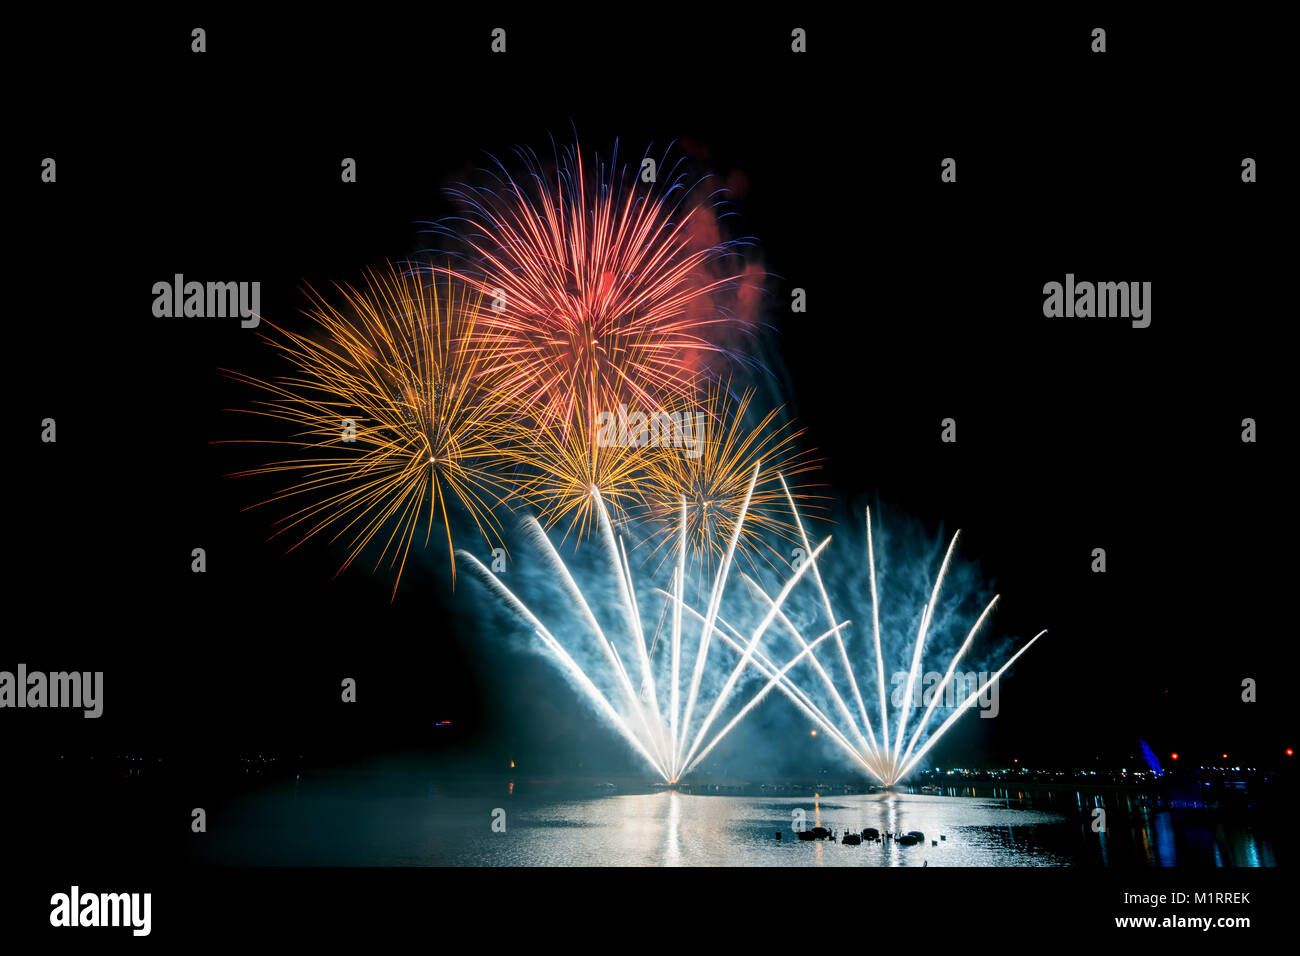 Bright and colorful fireworks against a black night sky.Fireworks for new year. Beautiful colorful fireworks display on the urban lake for celebration Stock Photo